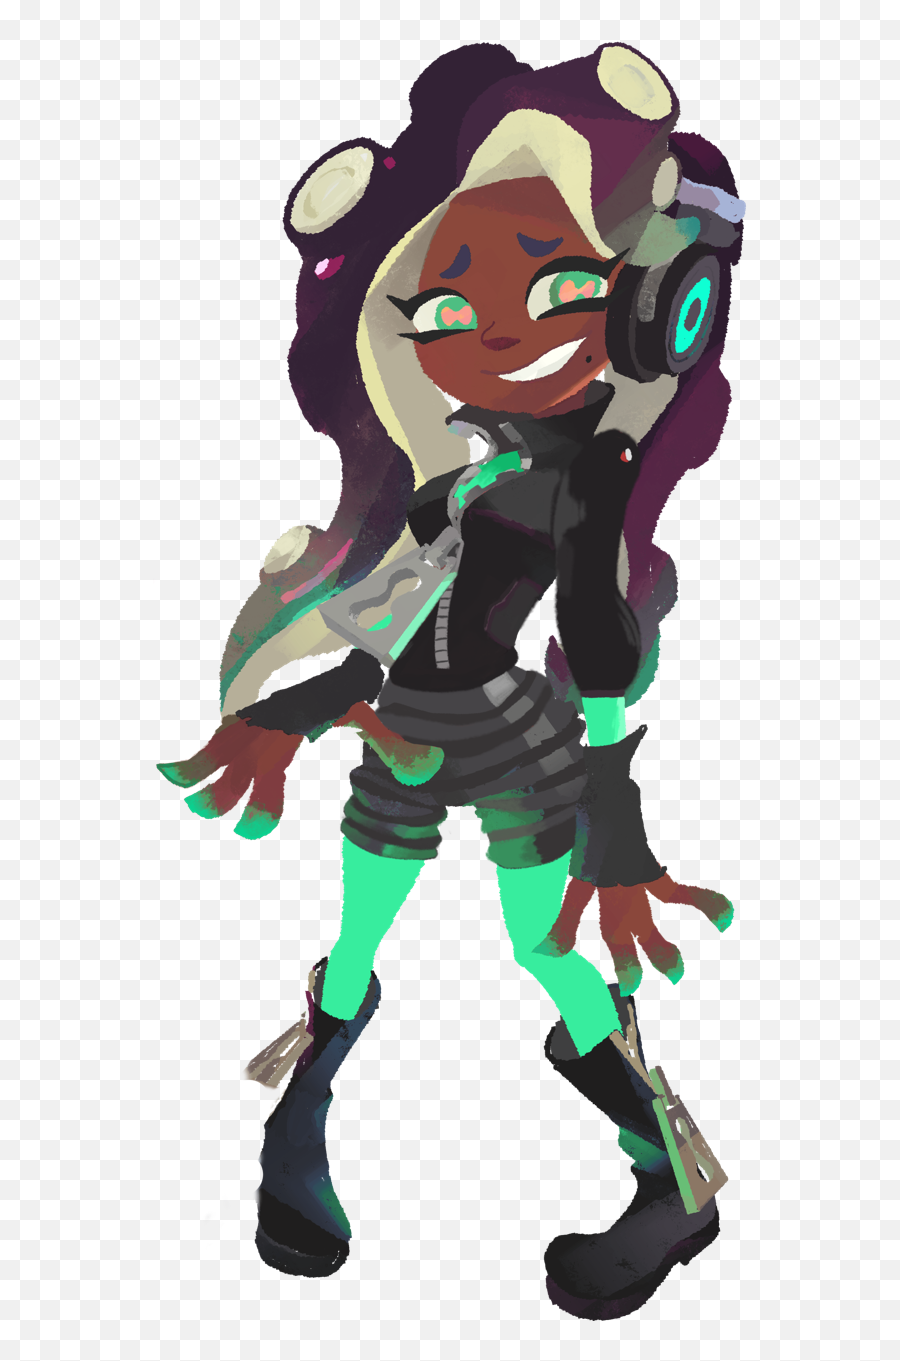 Agent 8 Is Dating 3 She Told Me - Marina Splatoon Png,Splatoon Icon